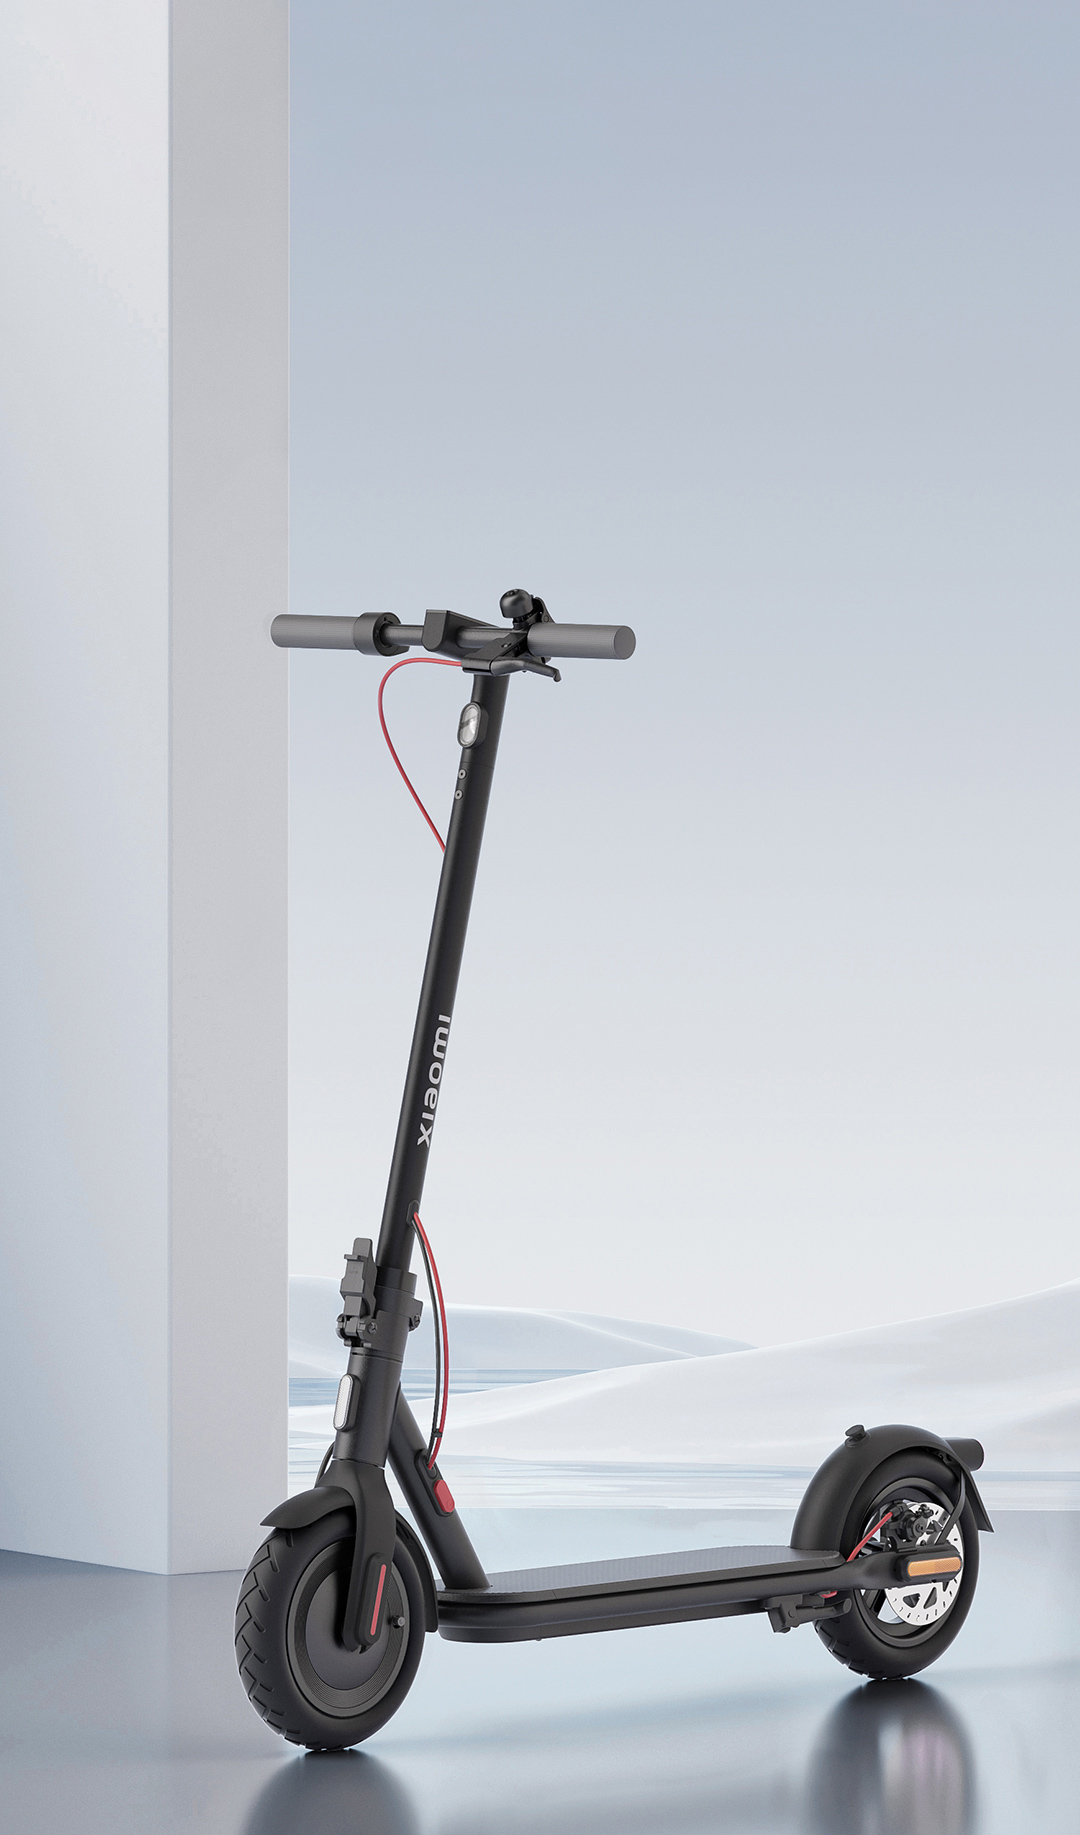 Home - Mi Global xiaomi-electric-scooter-4 - Specifications